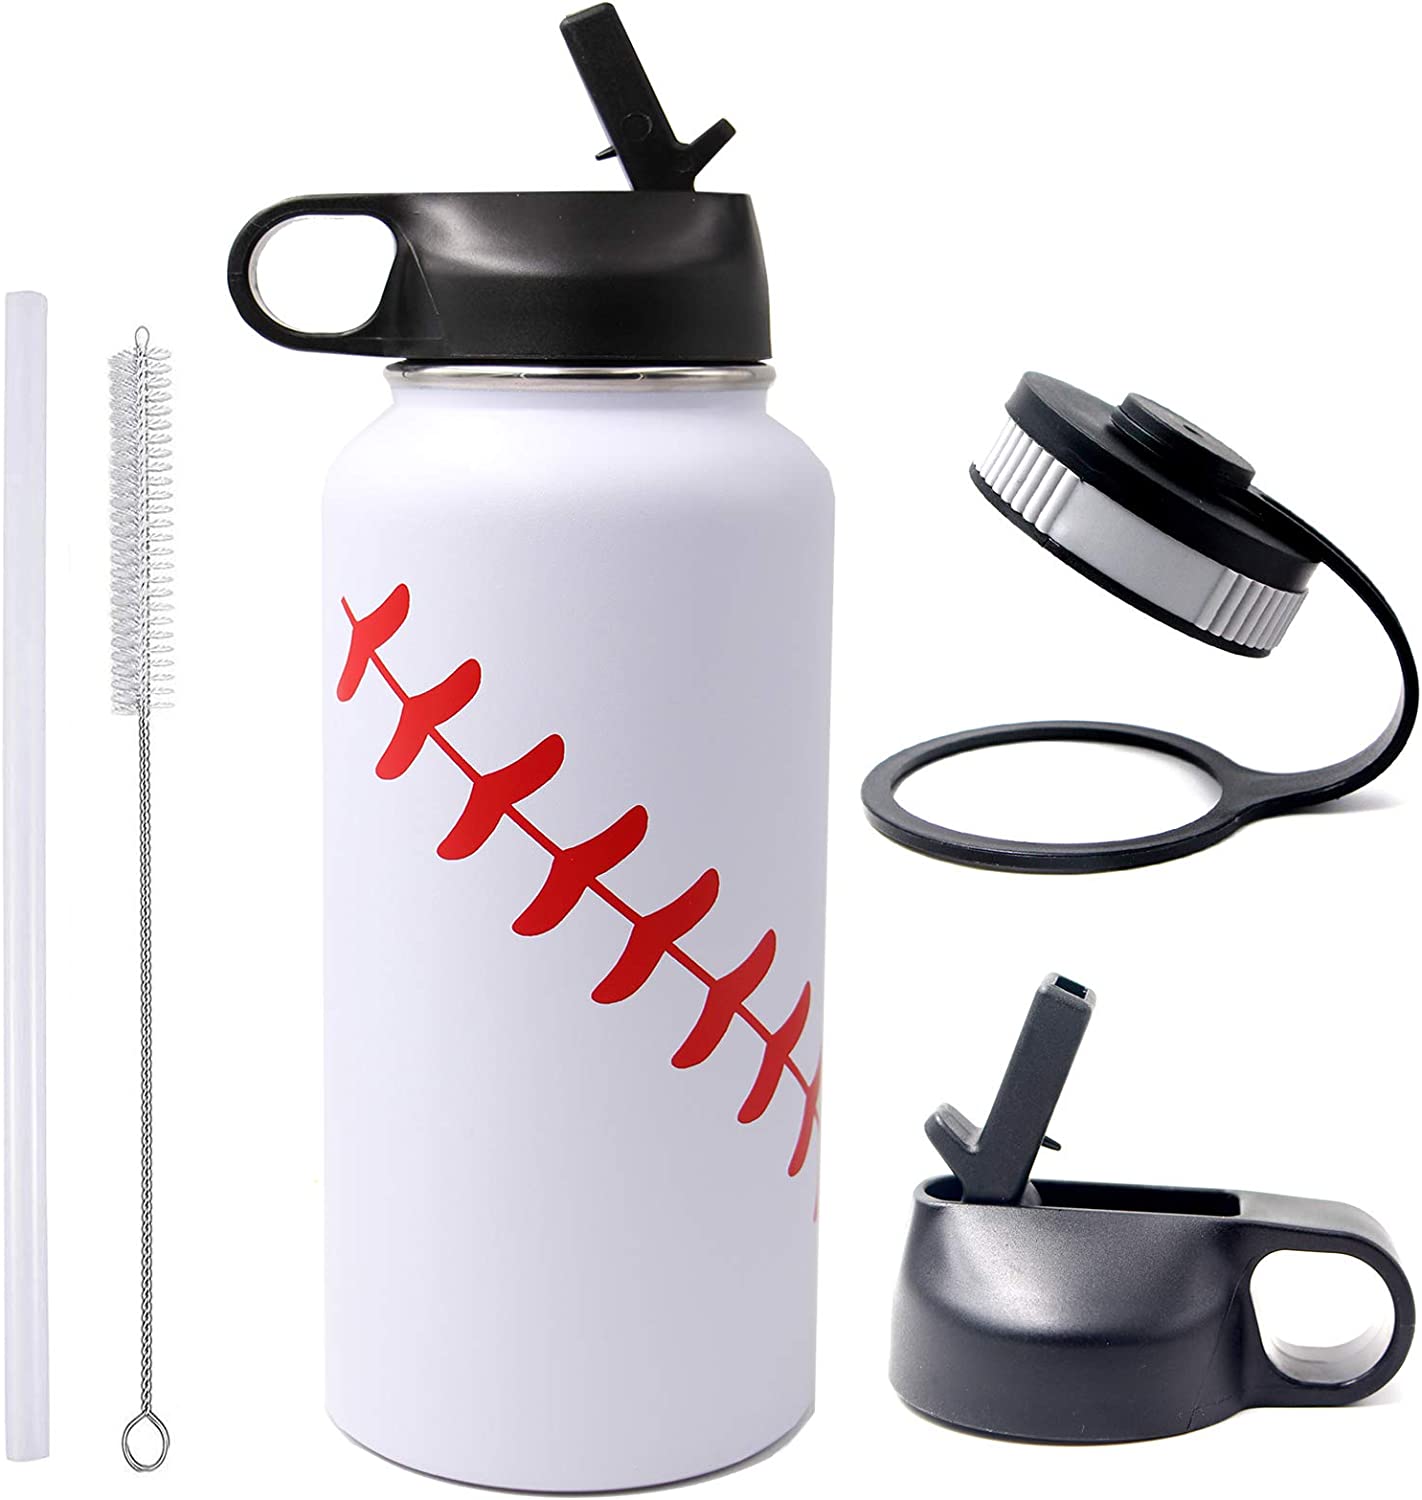 11 Home Runs Ideas! Helping You Finding the Perfect Baseball Father's Day Gift